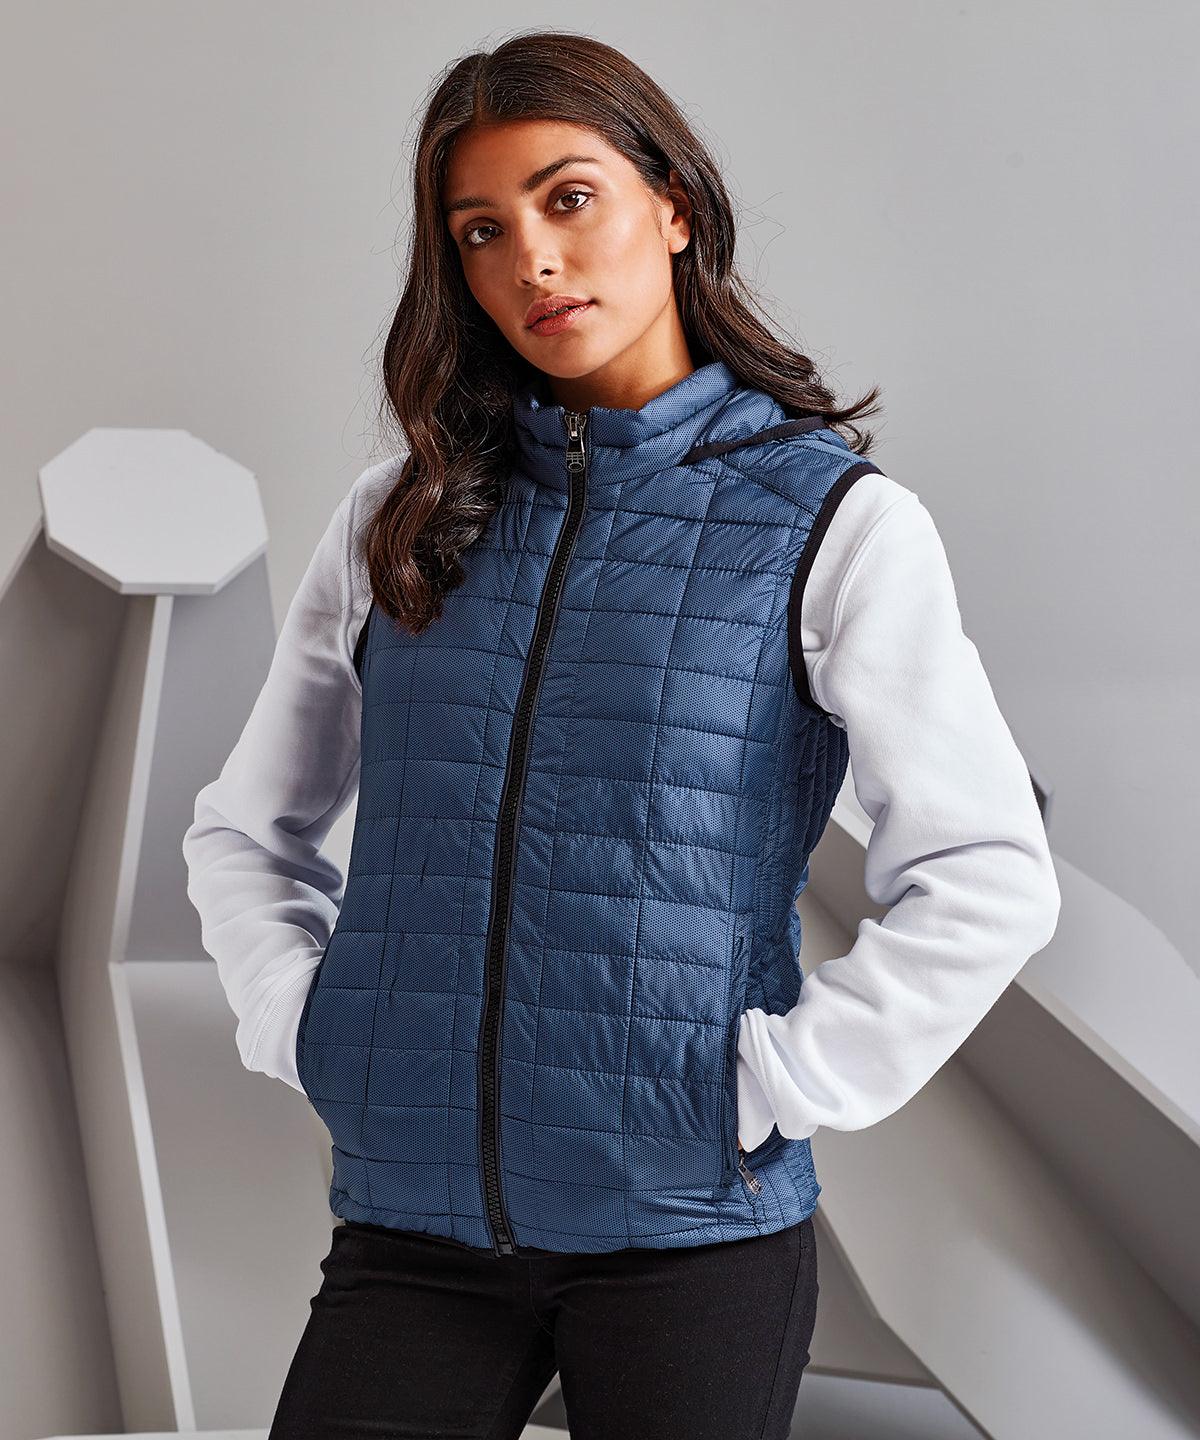 Steel - Women's honeycomb hooded gilet Body Warmers 2786 Gilets and Bodywarmers, Jackets & Coats, Padded & Insulation, Rebrandable, Women's Fashion Schoolwear Centres